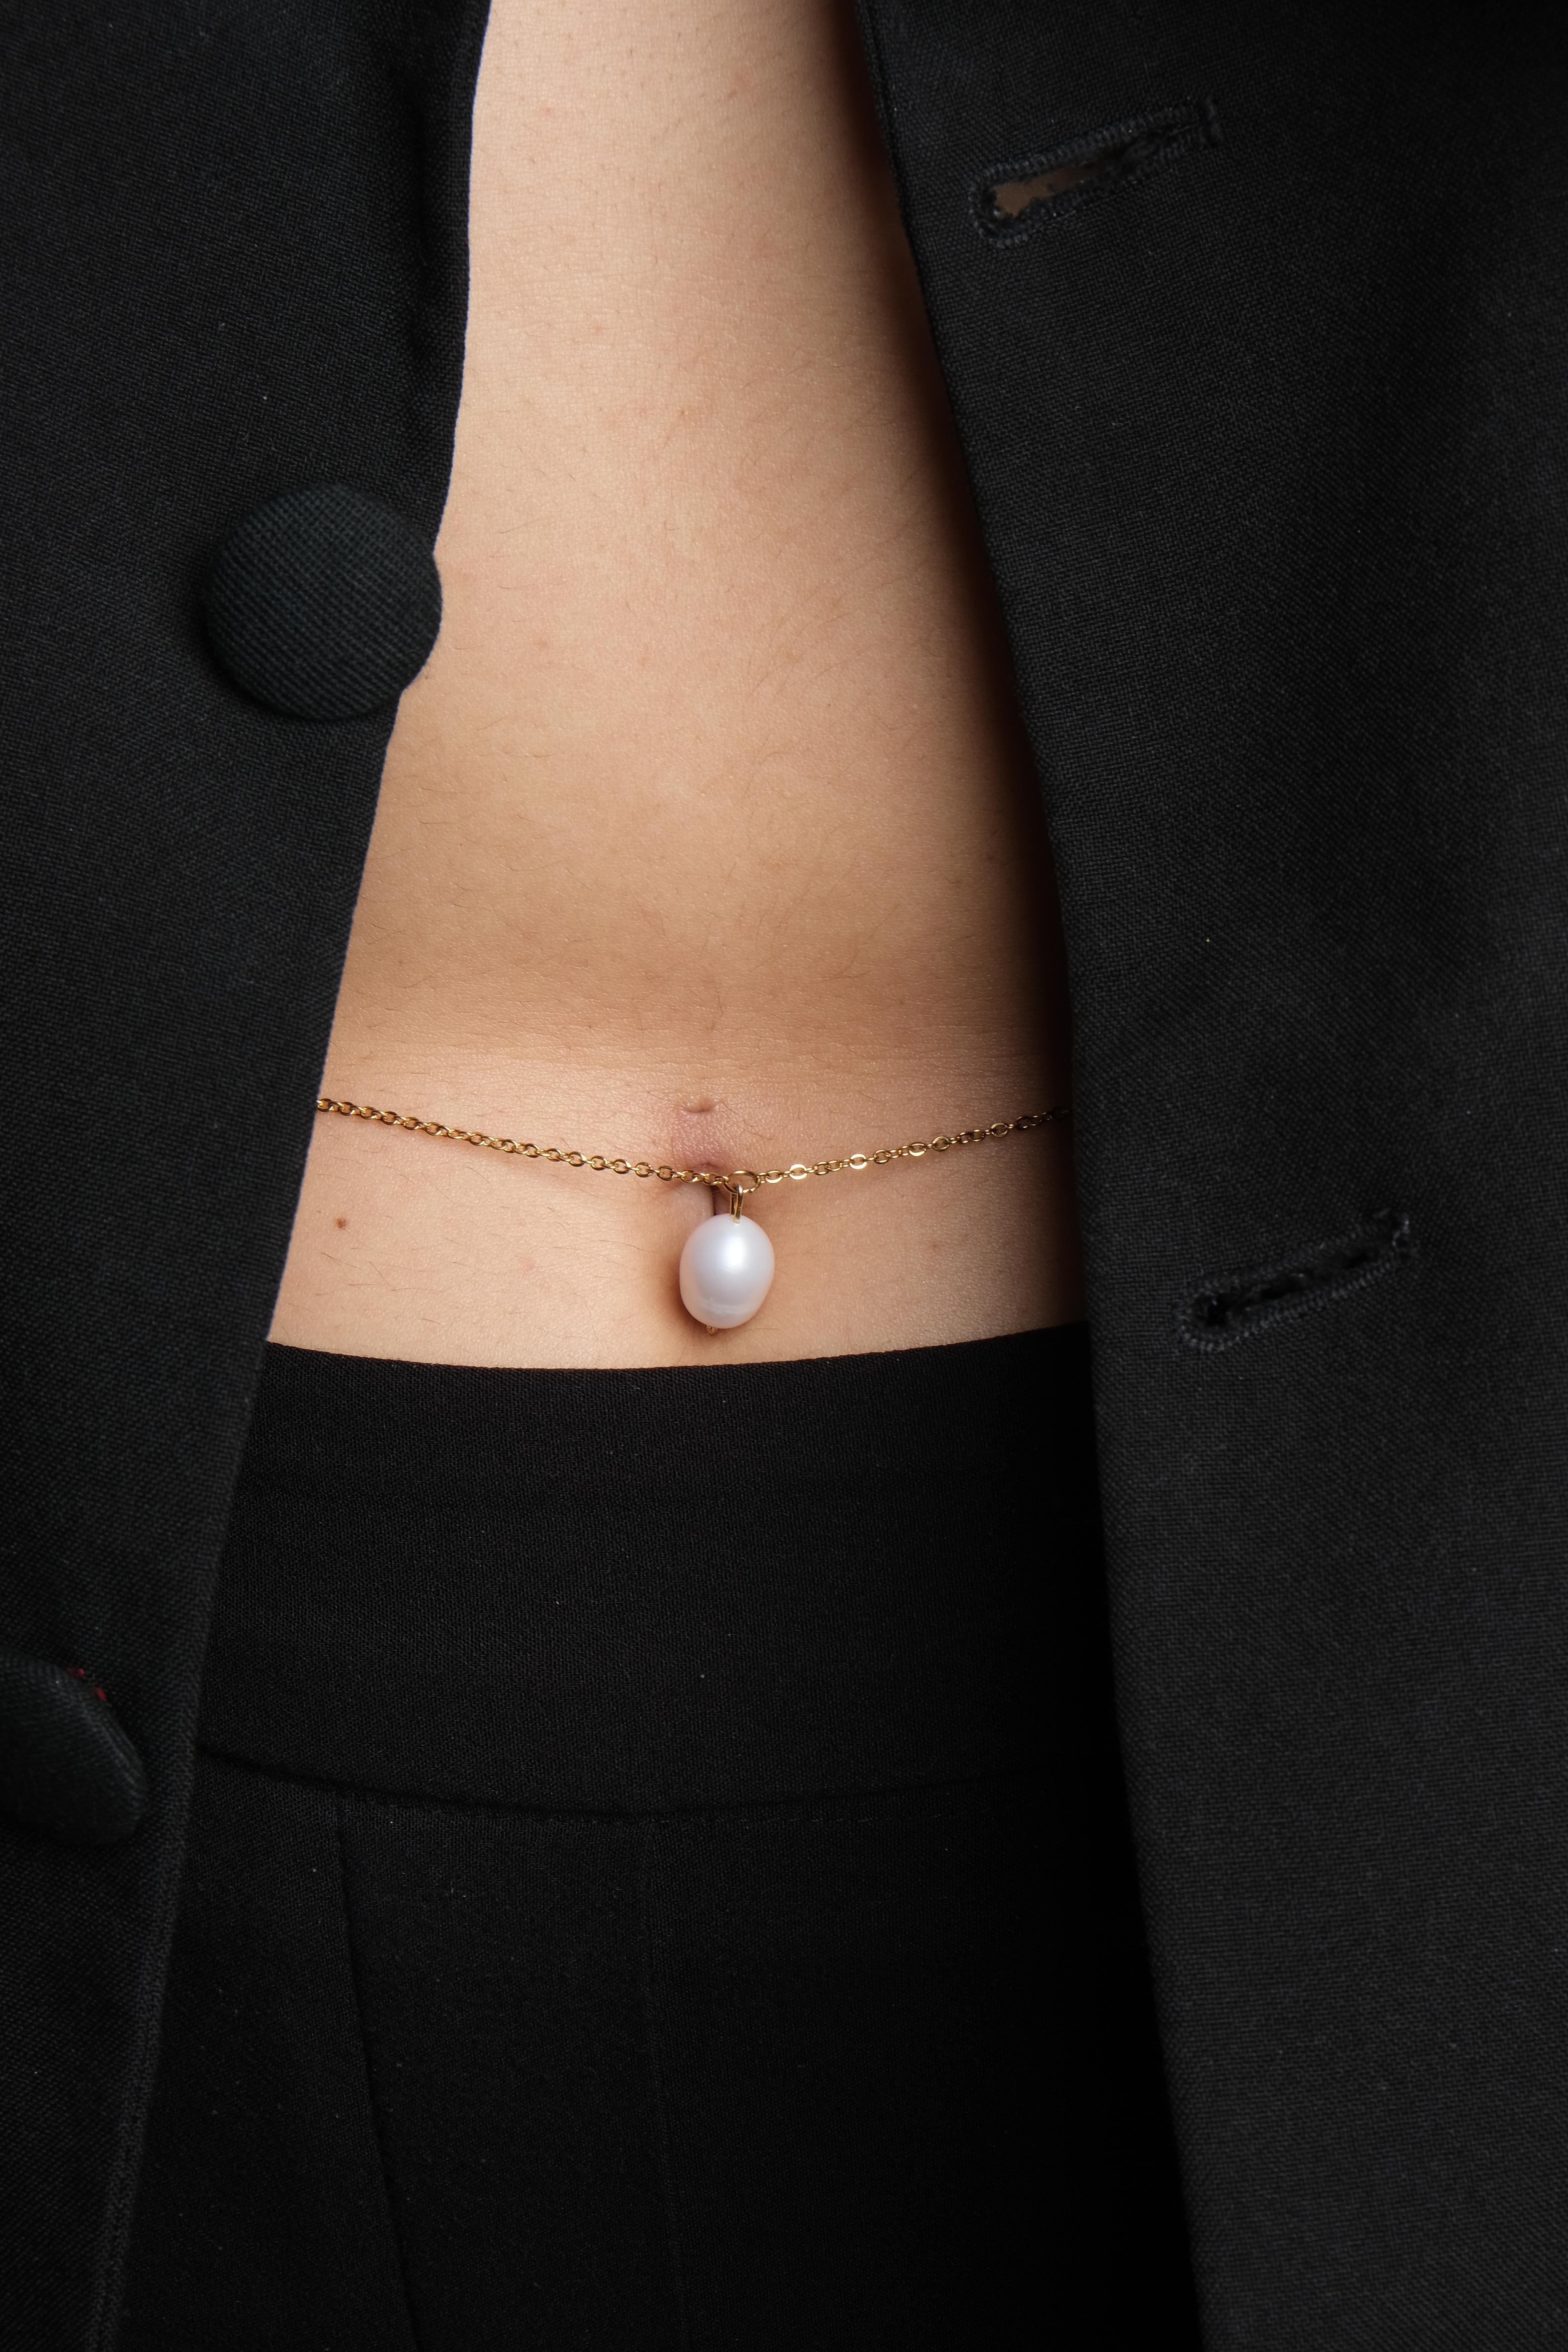 Stainless steel belly chain with freshwater pearl